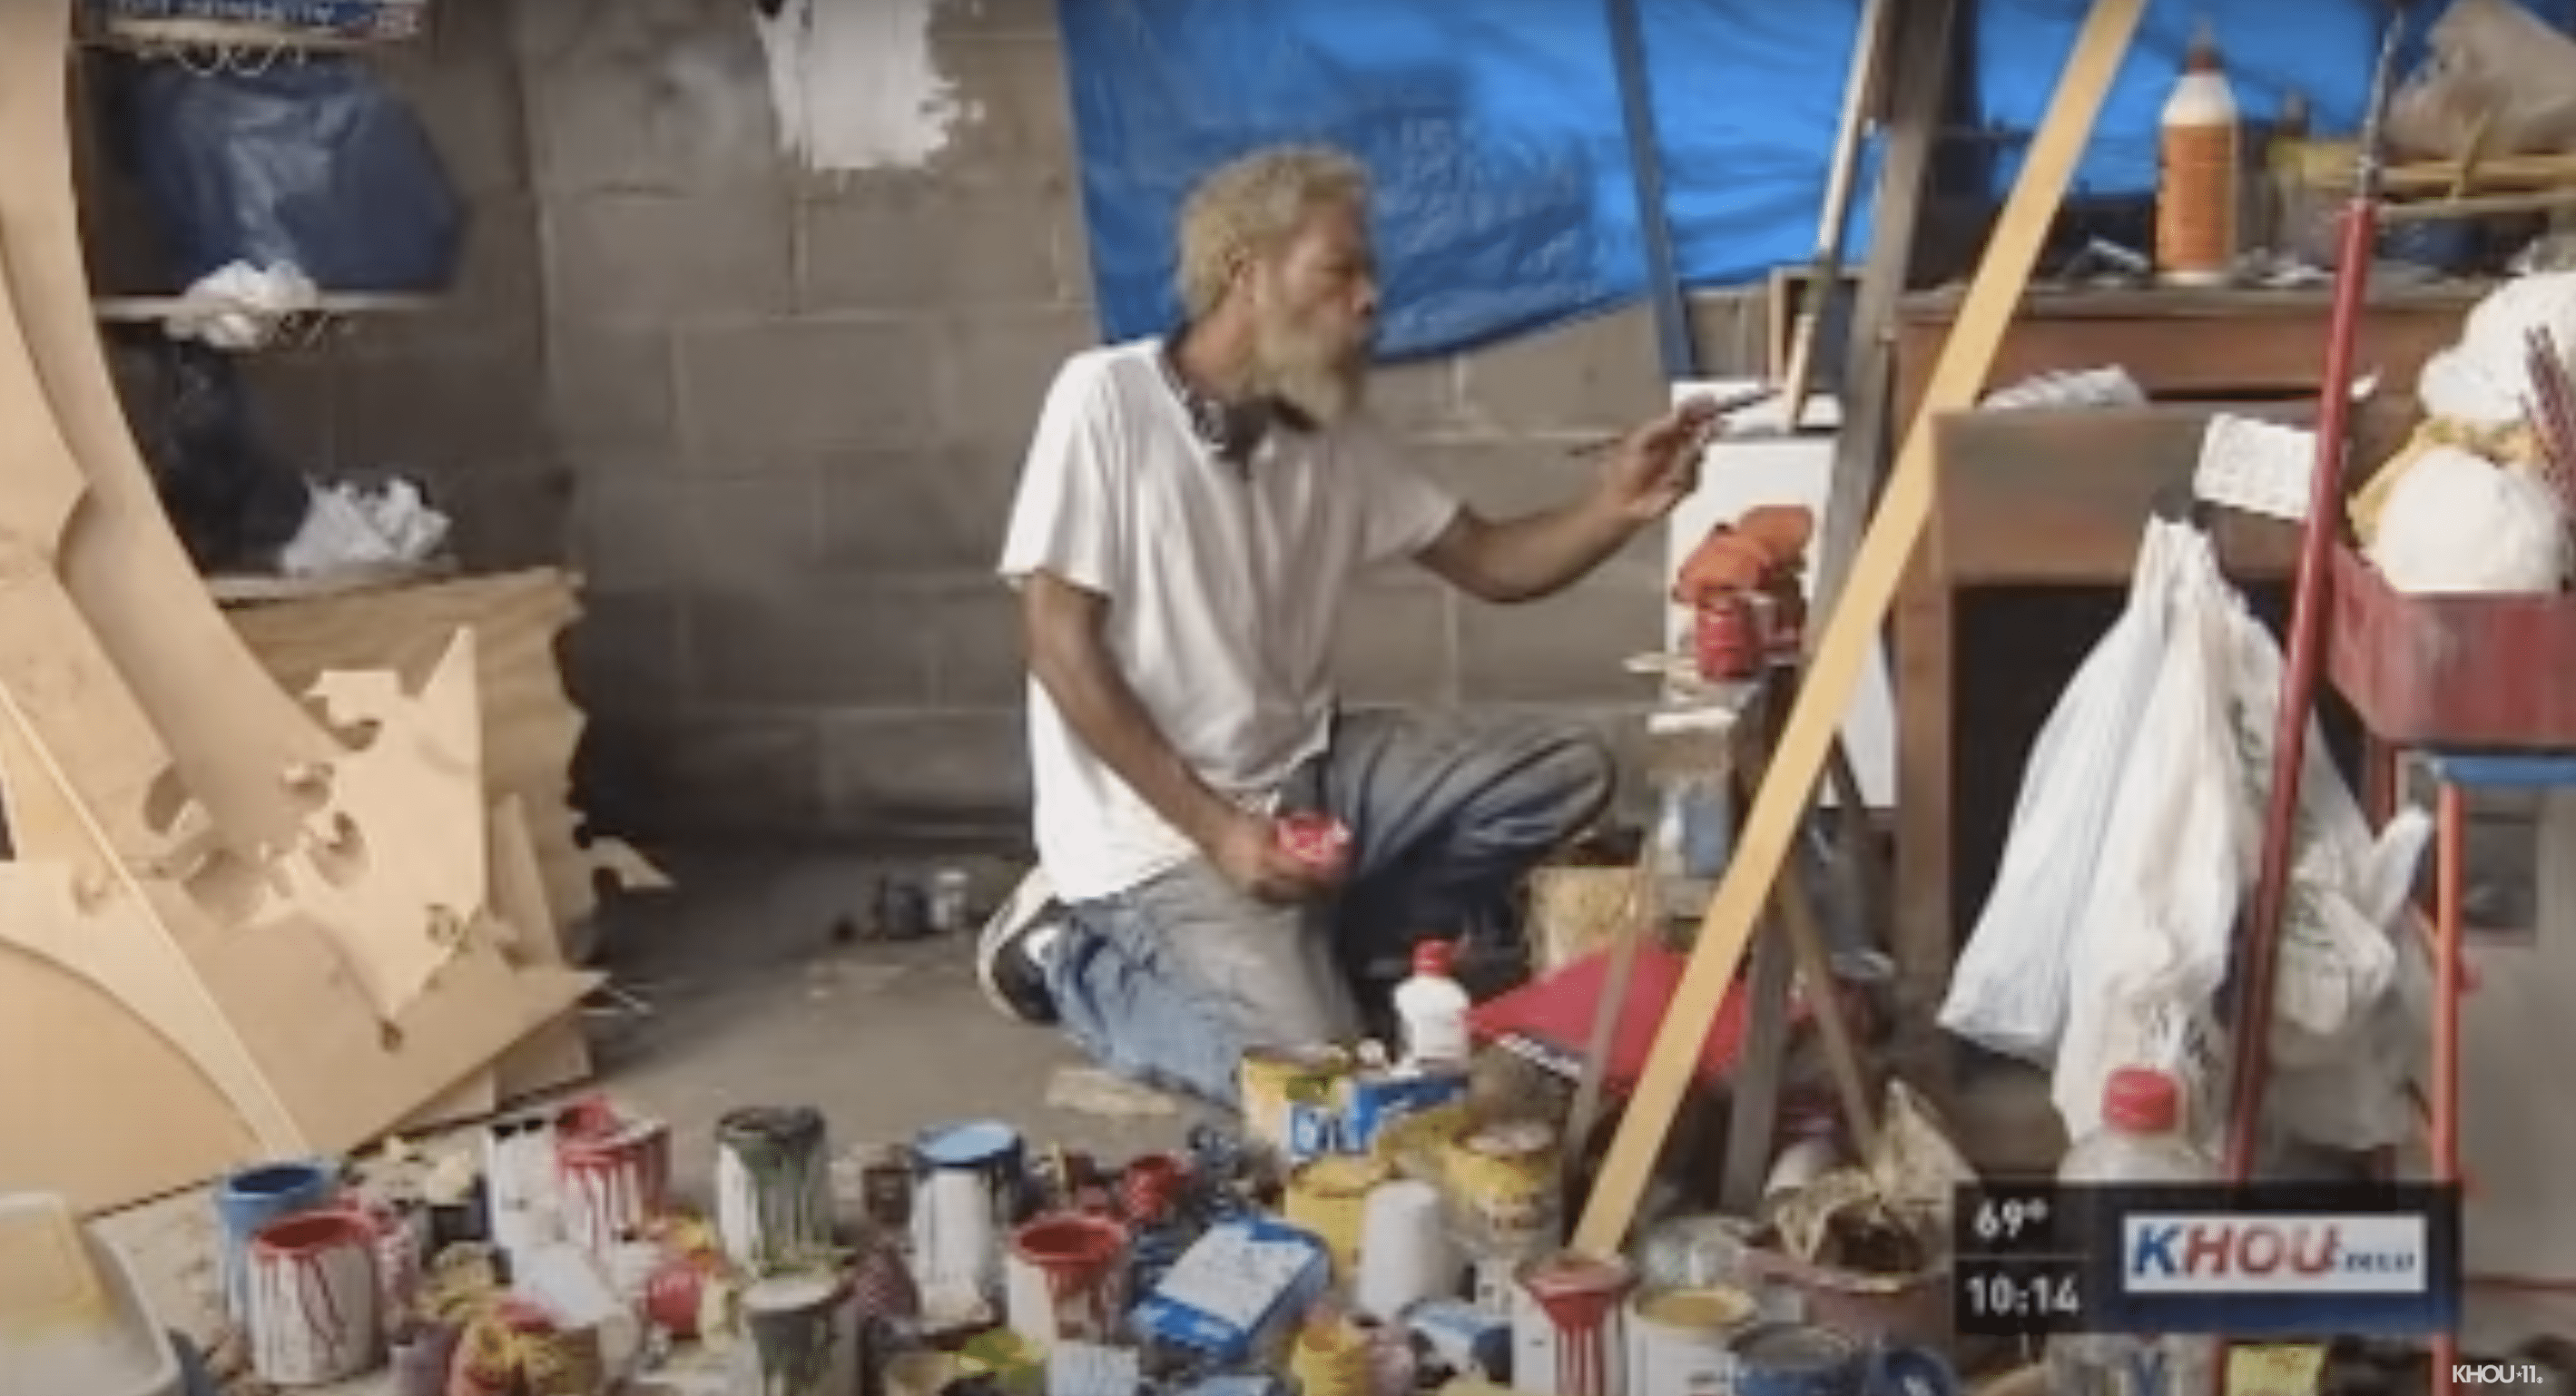 Rudolph pictured painting. | Source: youtube.com/KHOU 11